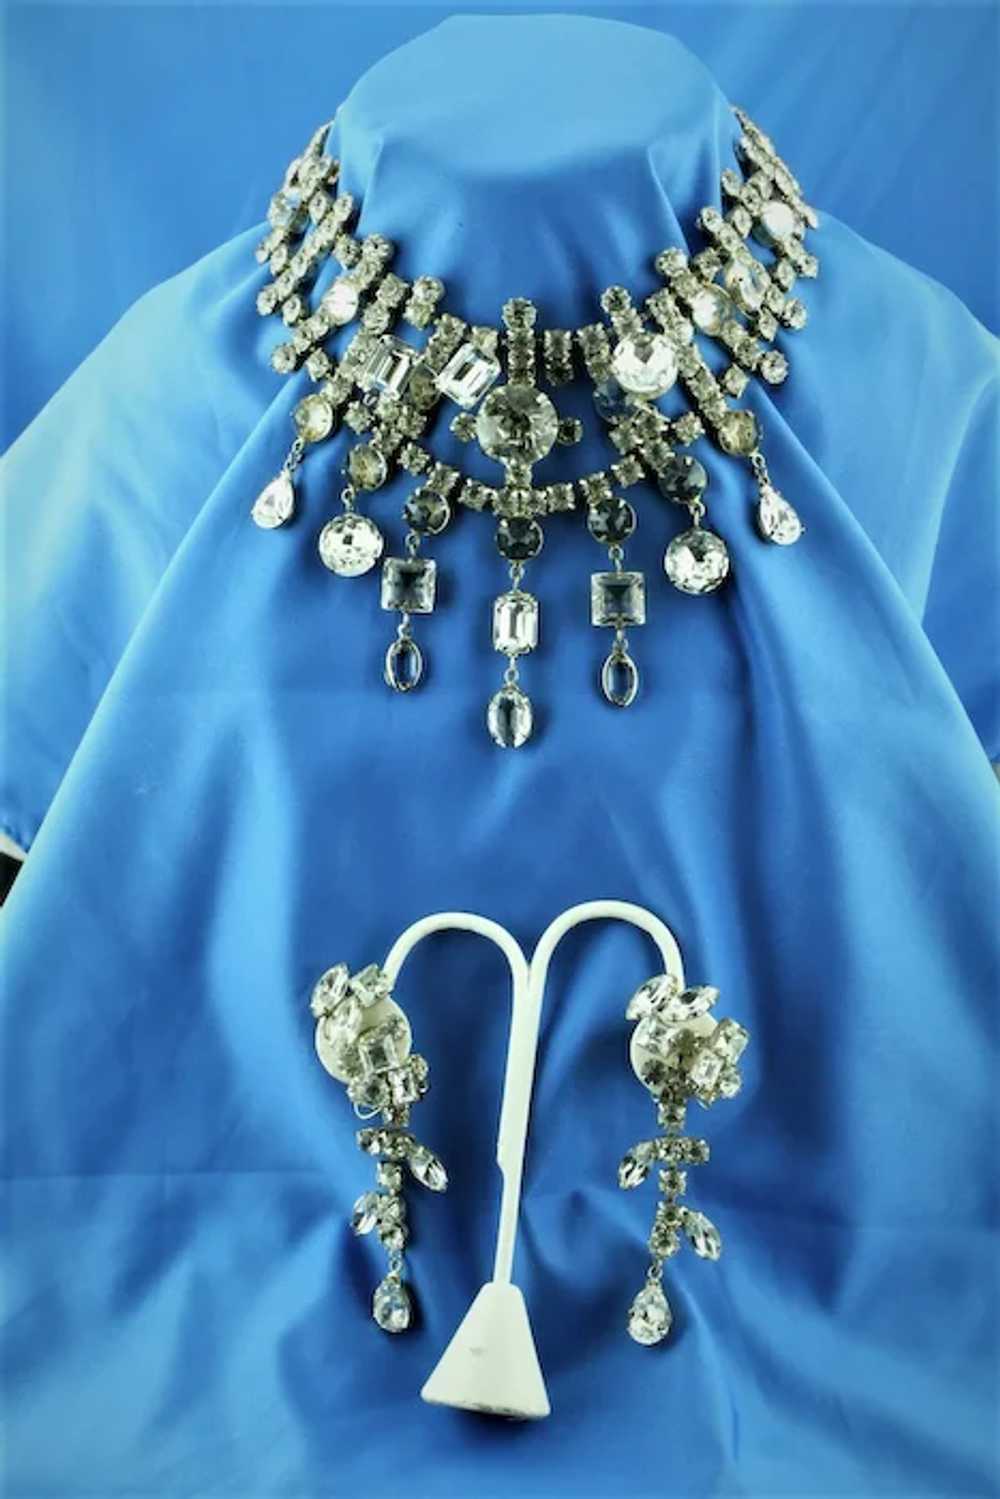 Kenneth Lane for Dynasty Necklace and Earrings - image 10